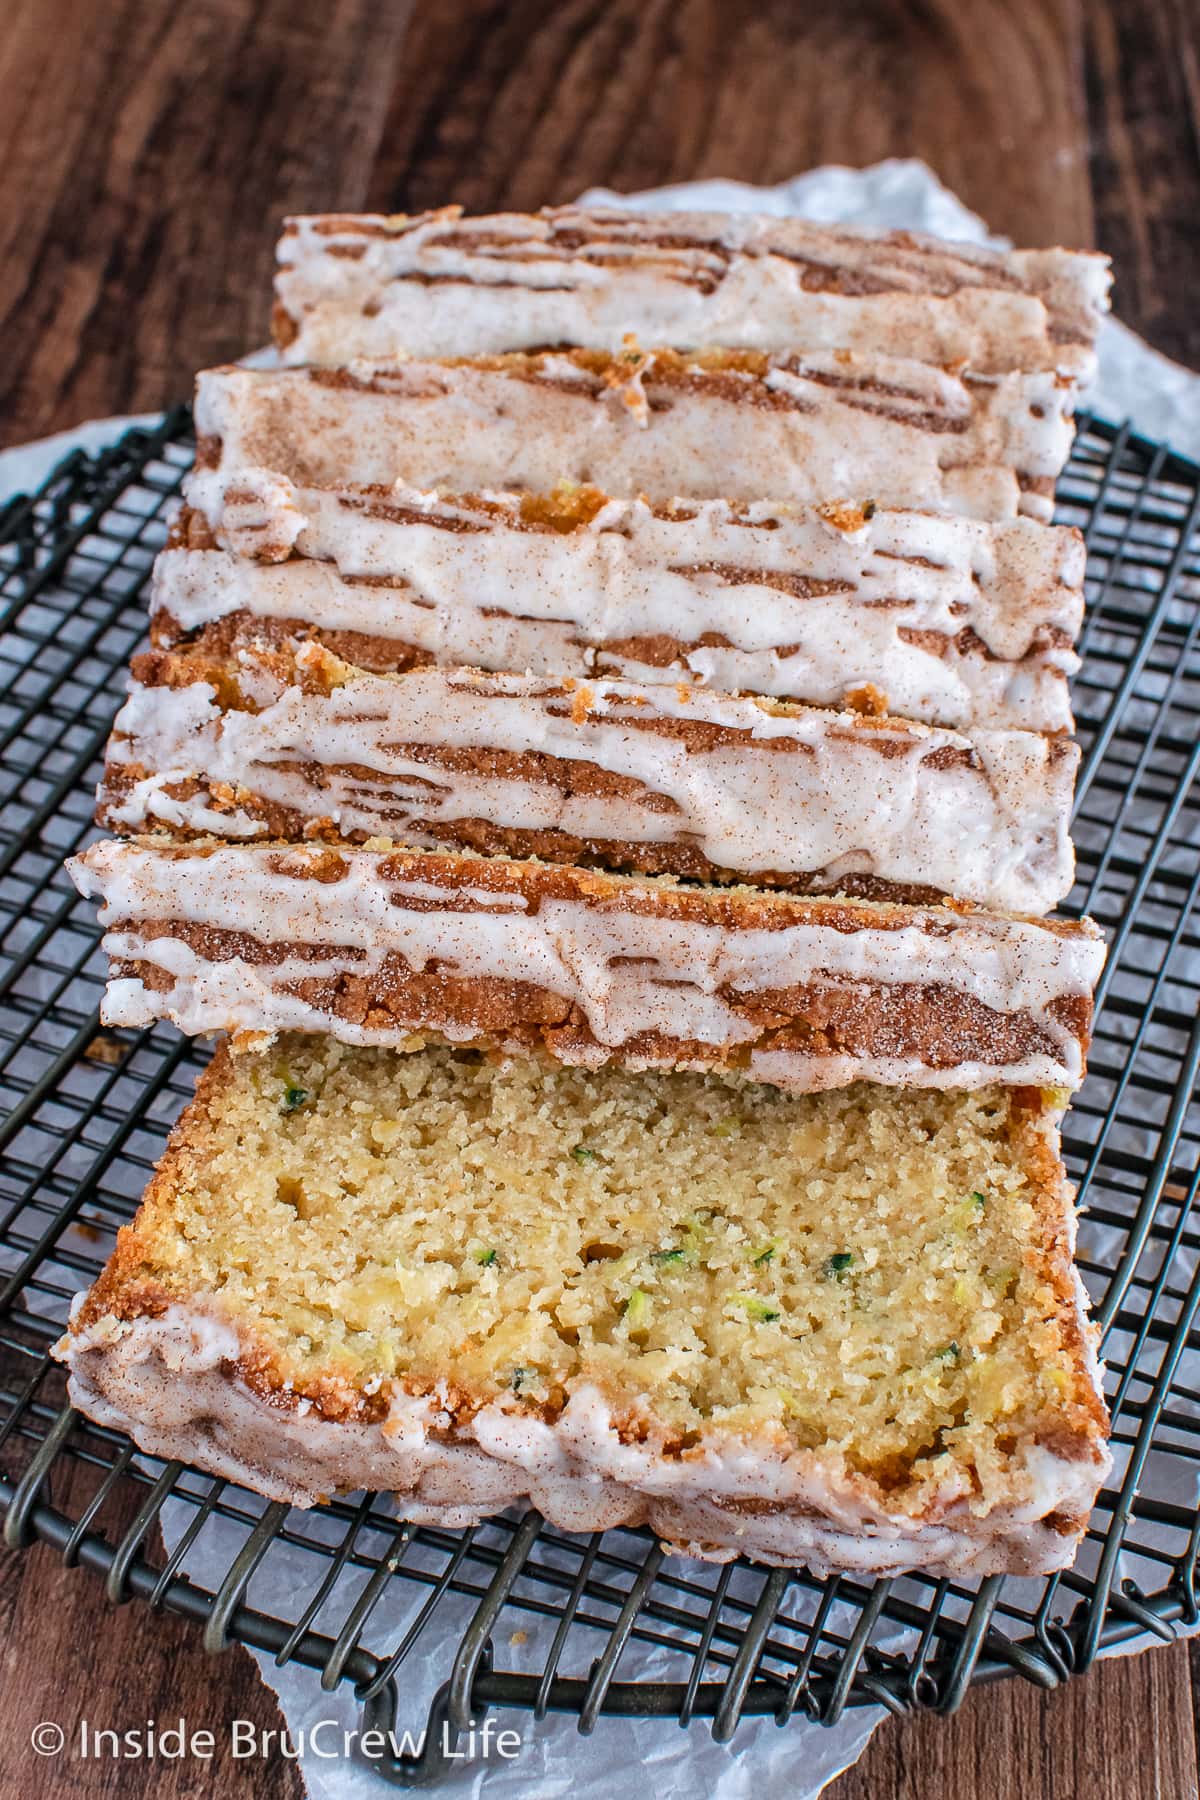 Slices of zucchini bread on a wire rack.